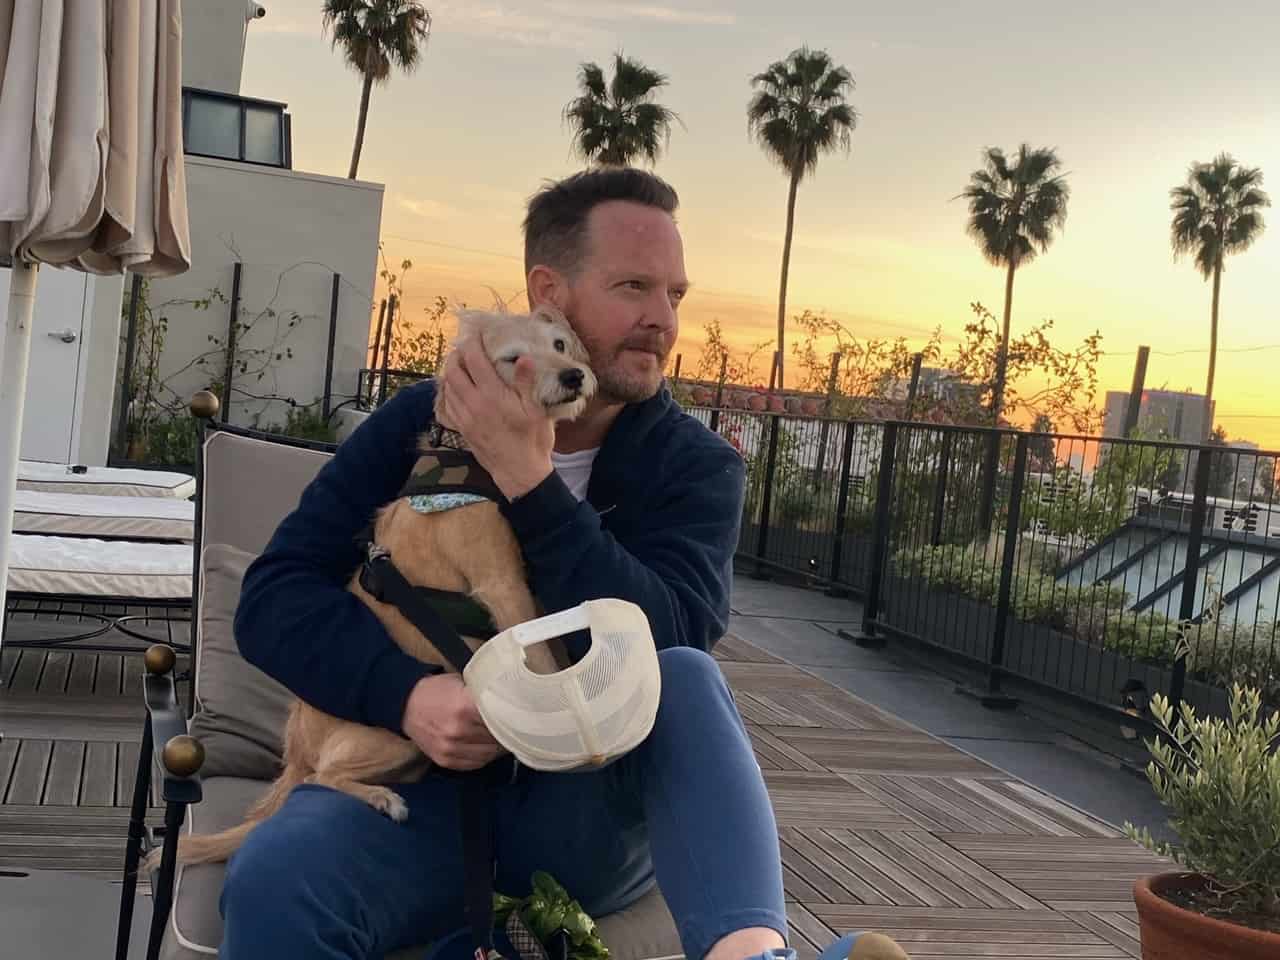 Jason-gray stanford holding his dog with view on sunset and palm trees in the background.